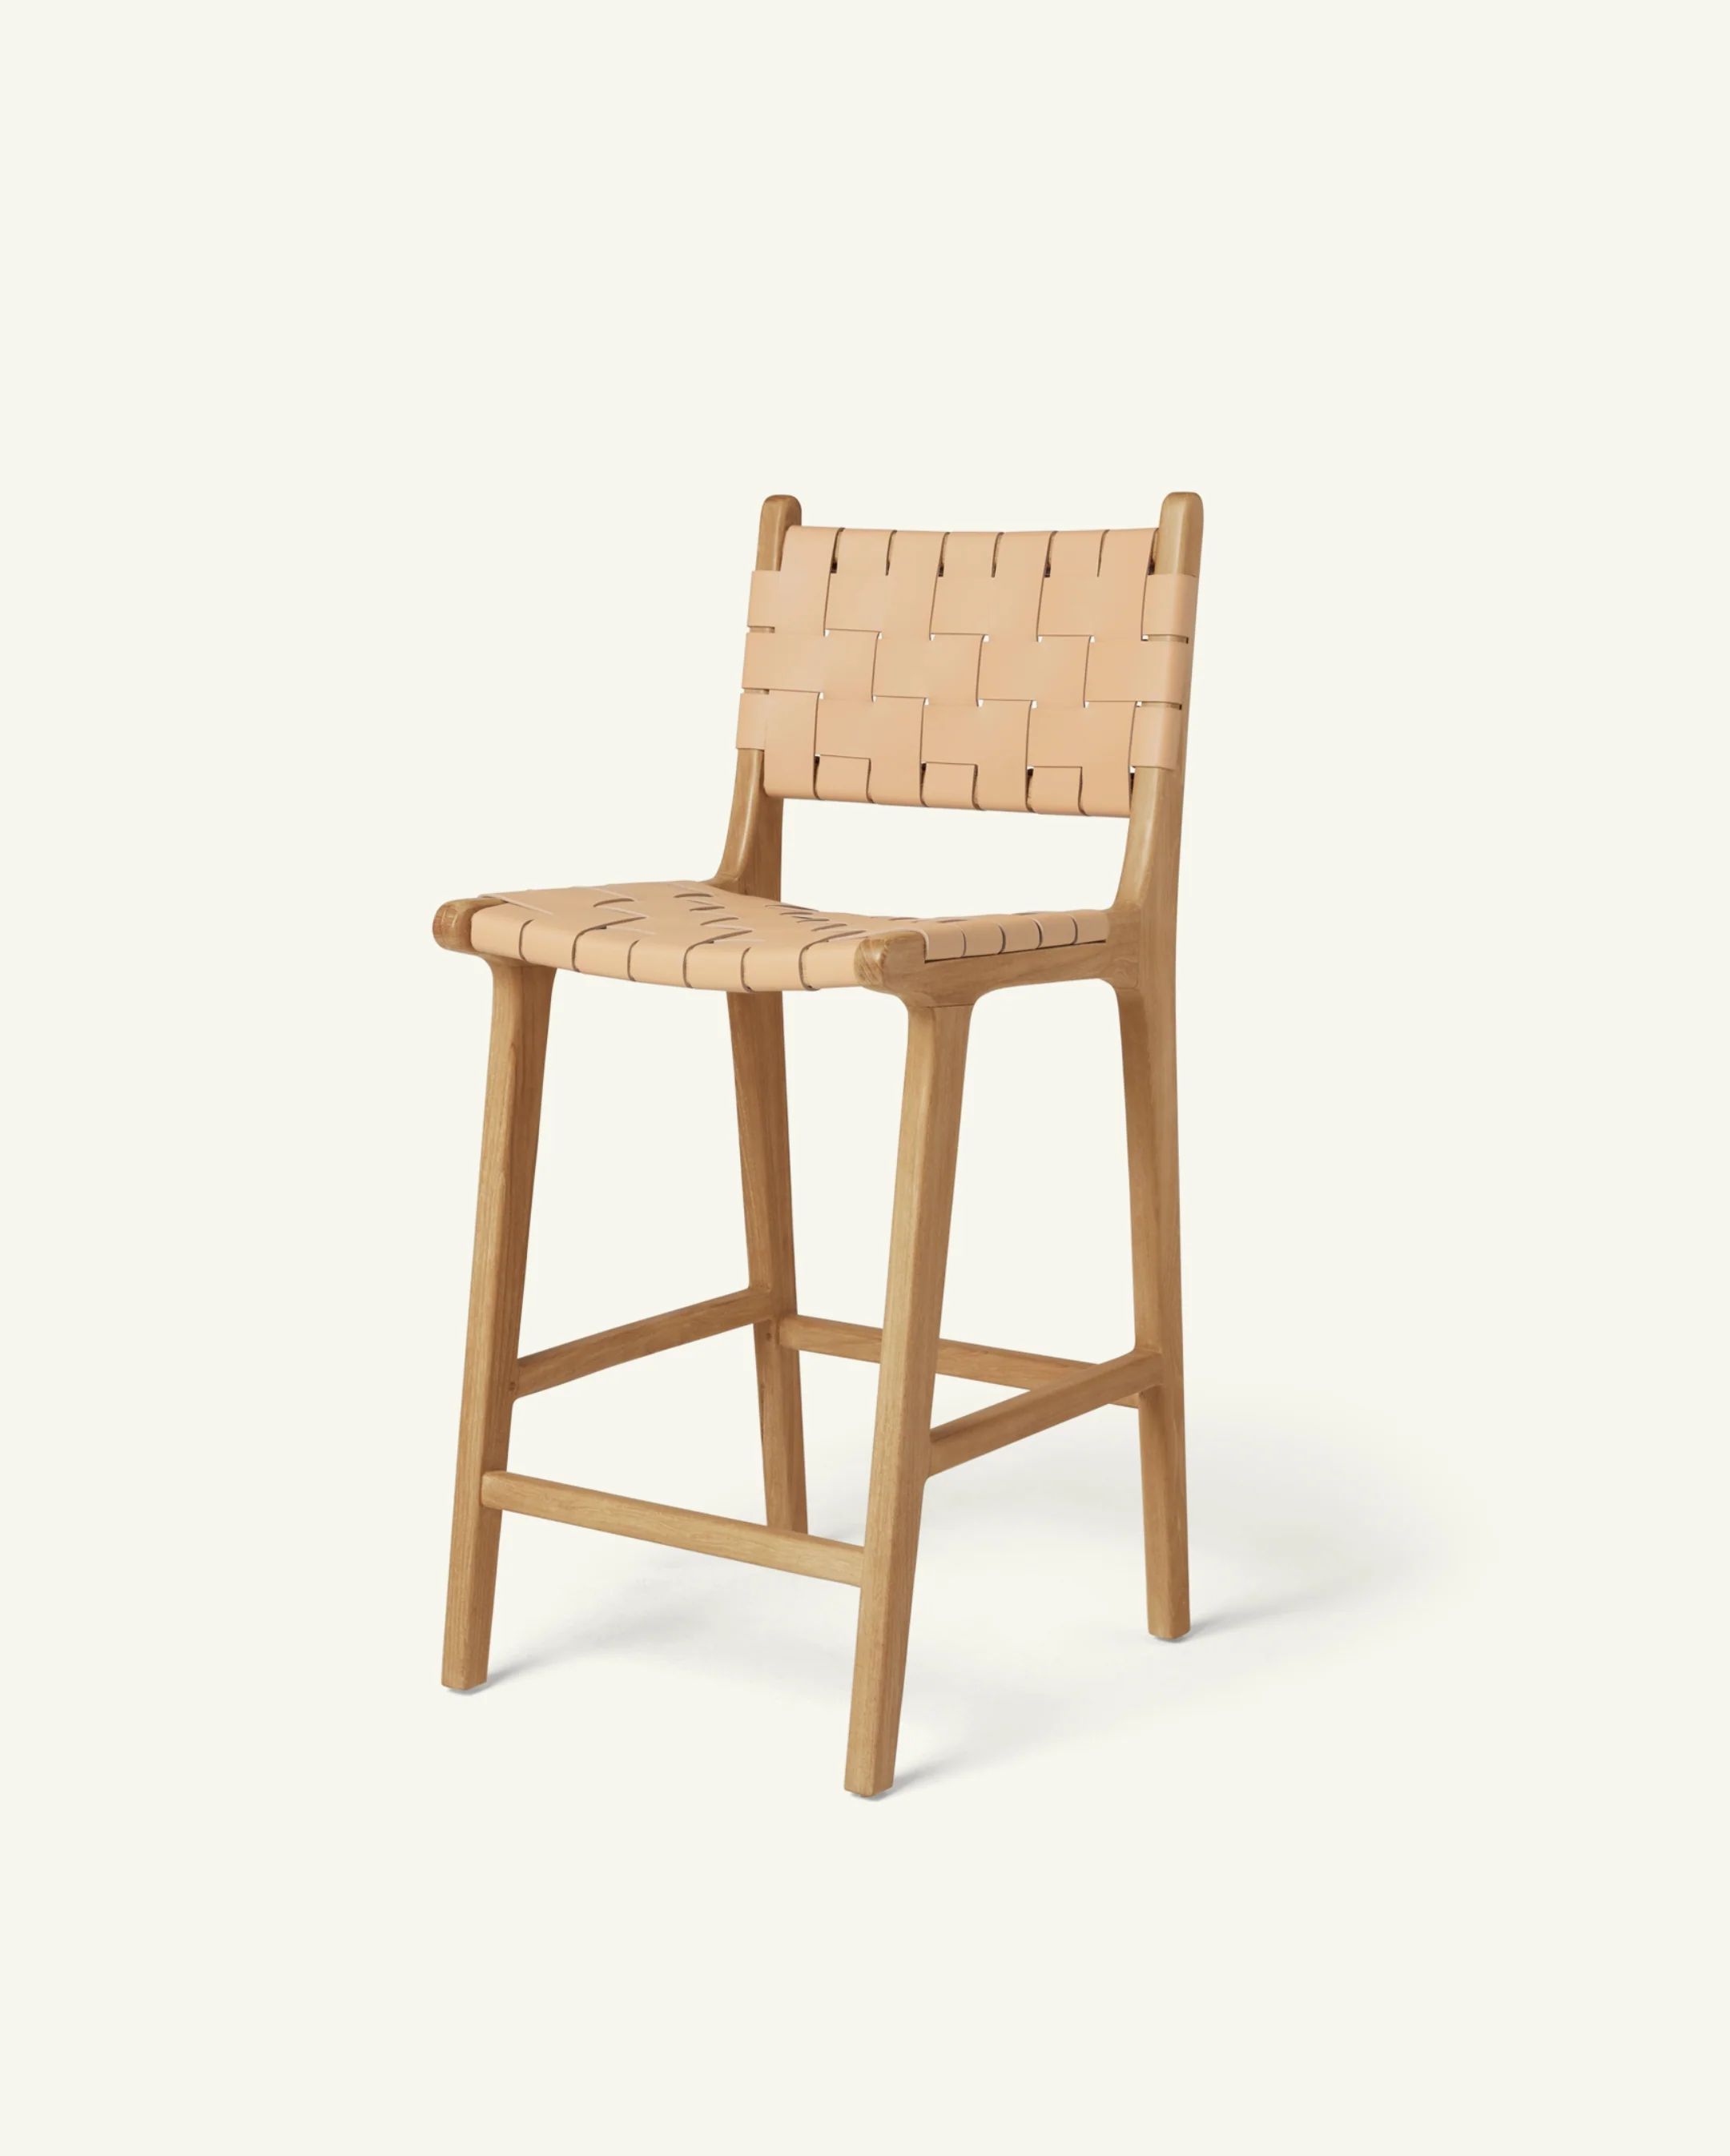 Stool #2 - Counter Stool in Teak with Woven Neutral Leather | Hati Home